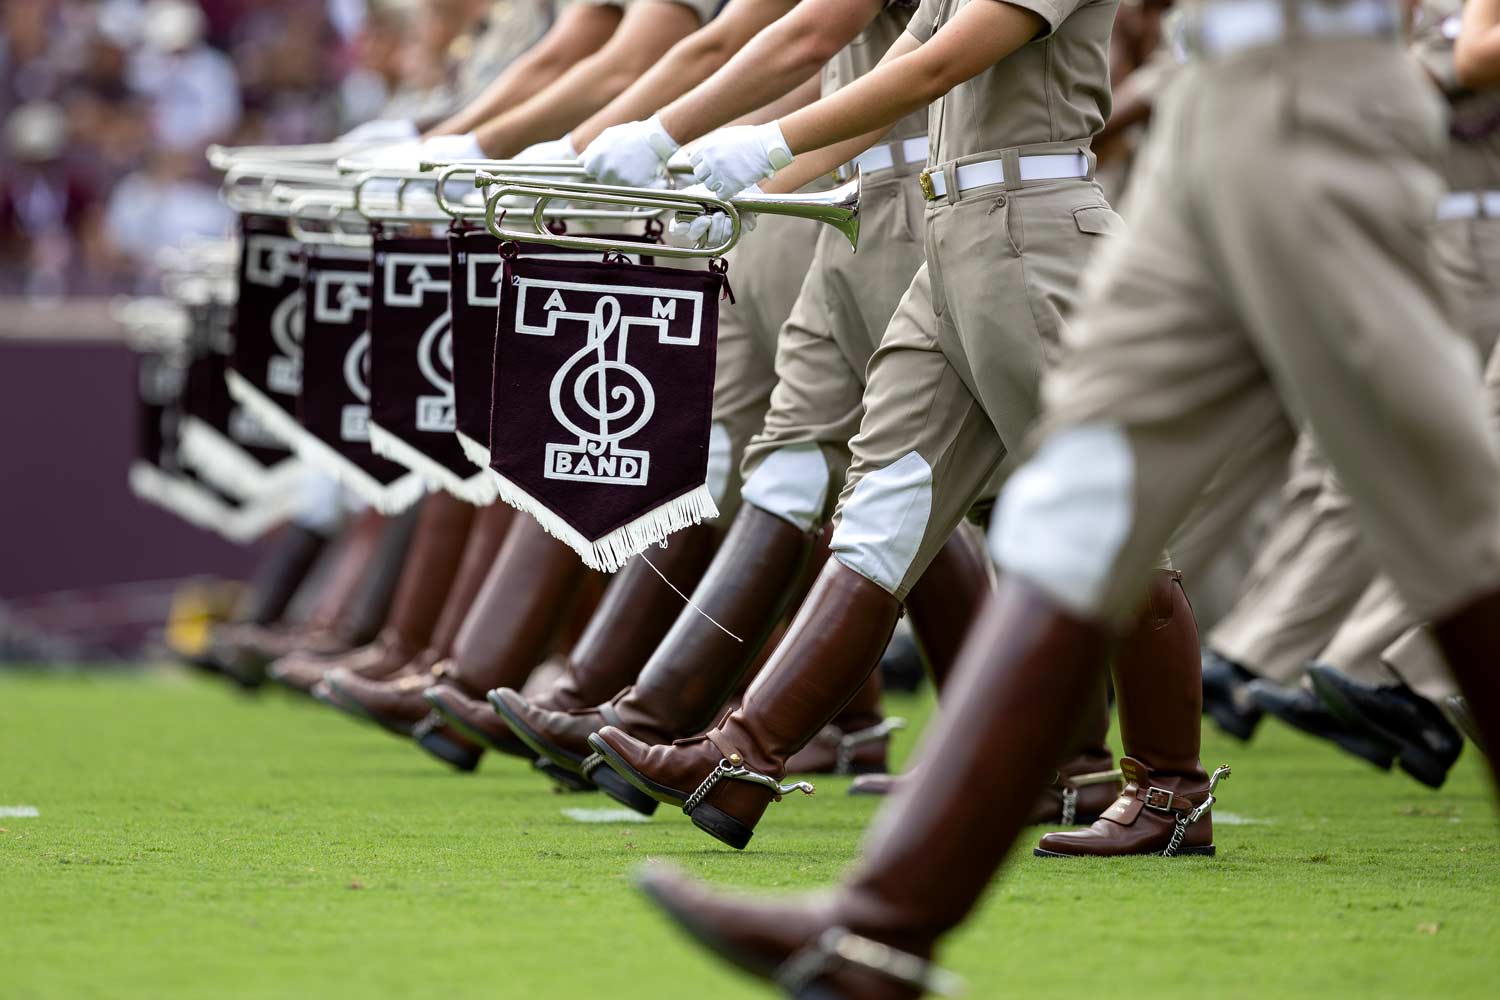 the Fightin' Texas Aggie band marches on field for their halftime performance in Kyle Field